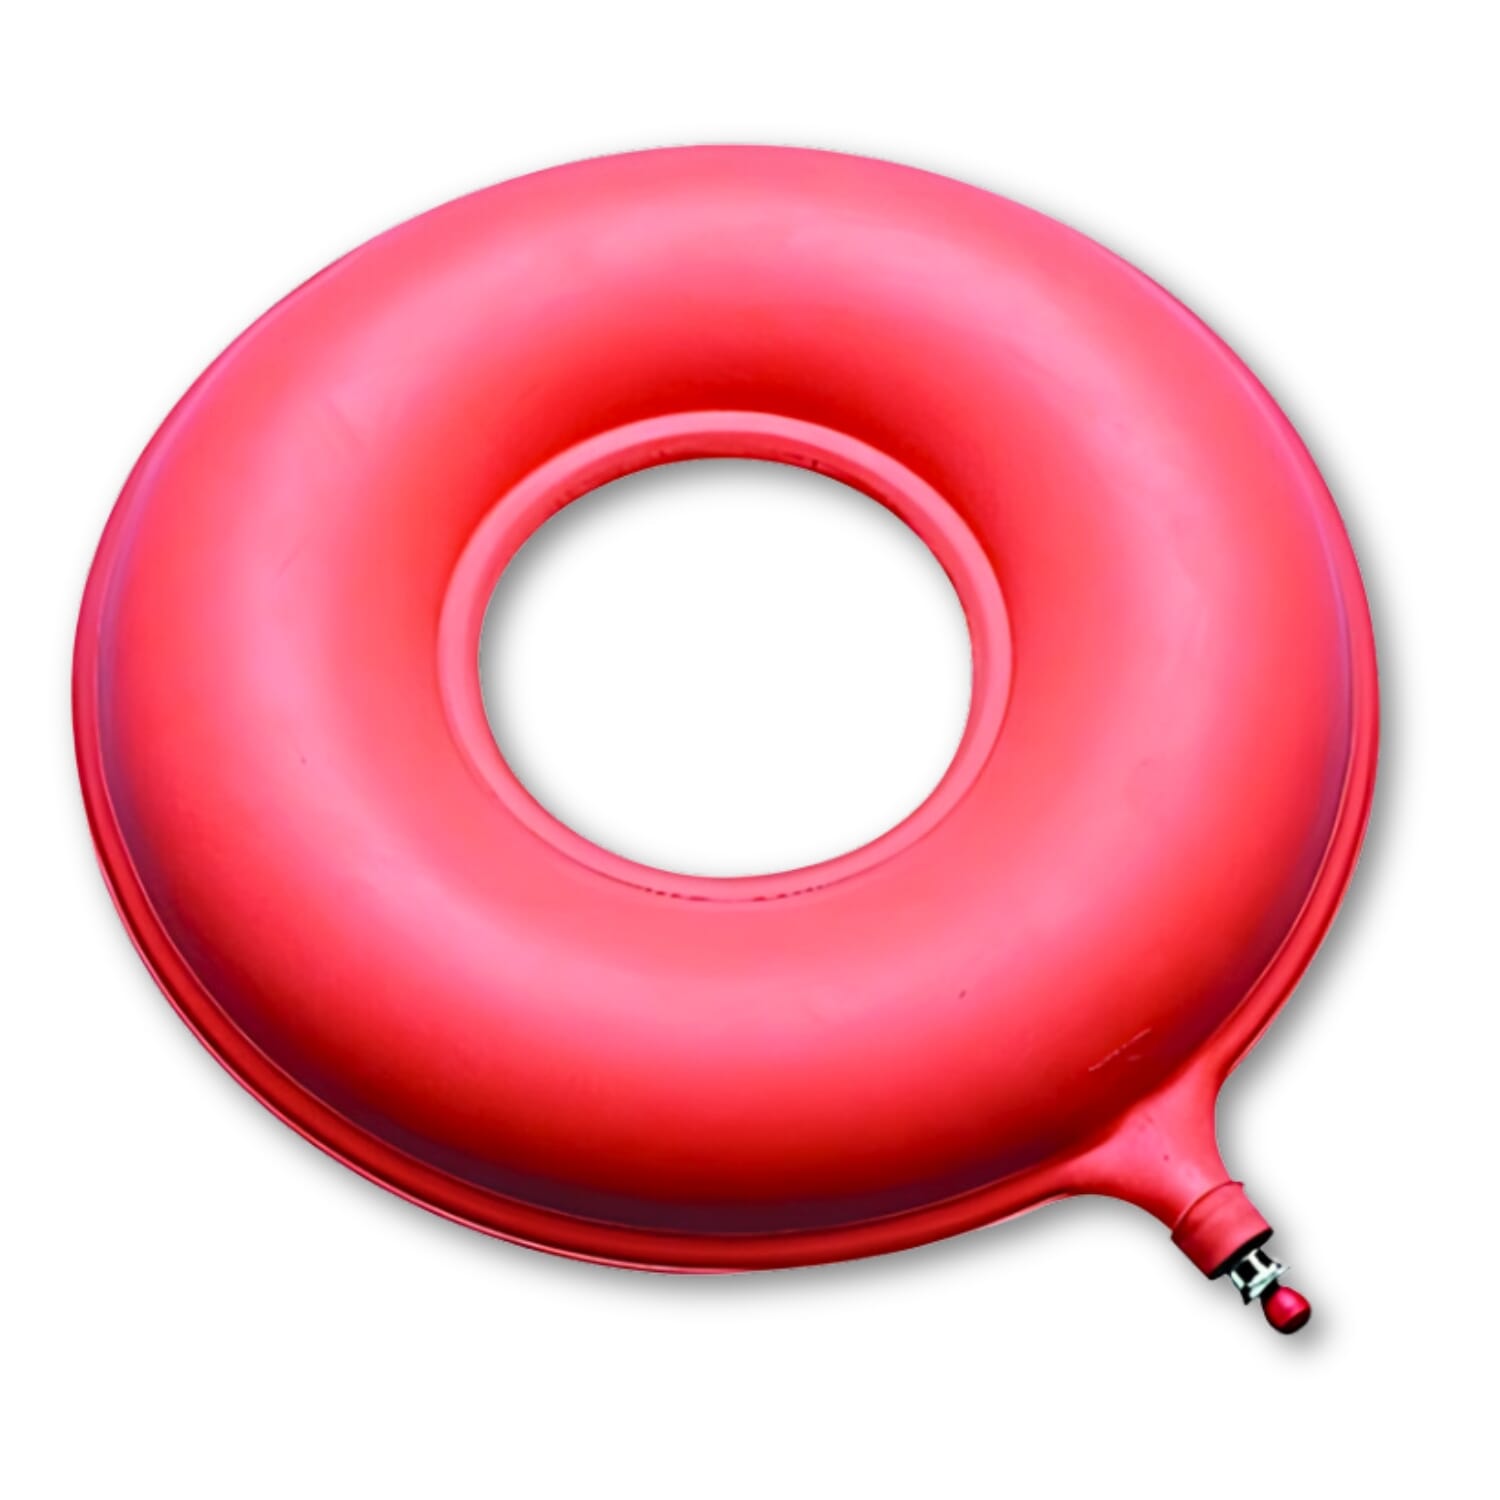 View Inflatable Ring Cushion Large information